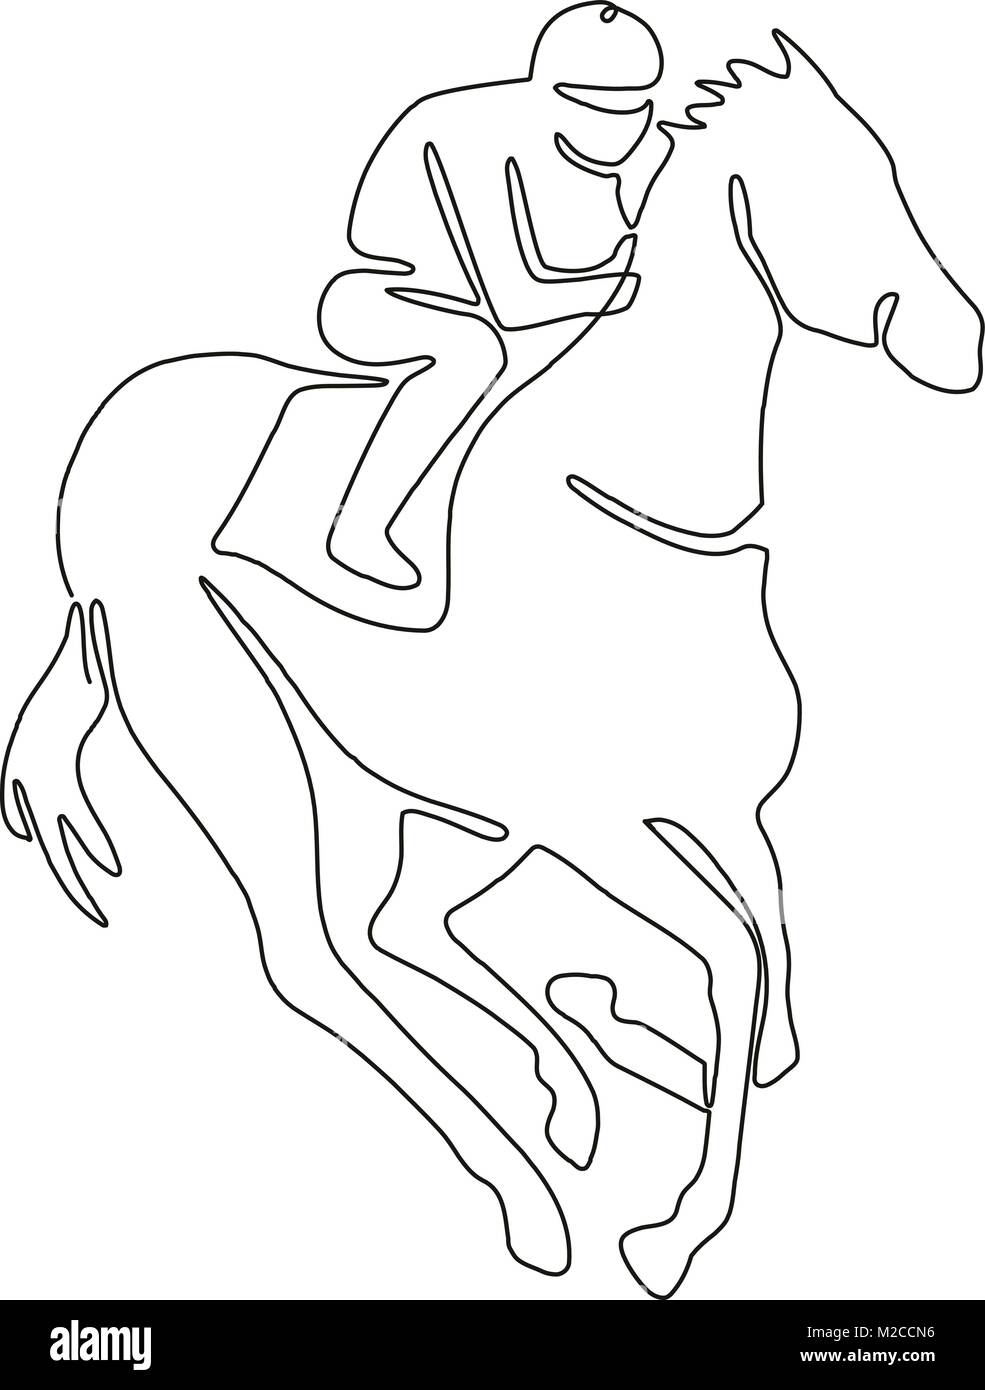 Continuous line drawing illustration of a jockey riding on horse racing done in sketch or doodle style. Stock Vector